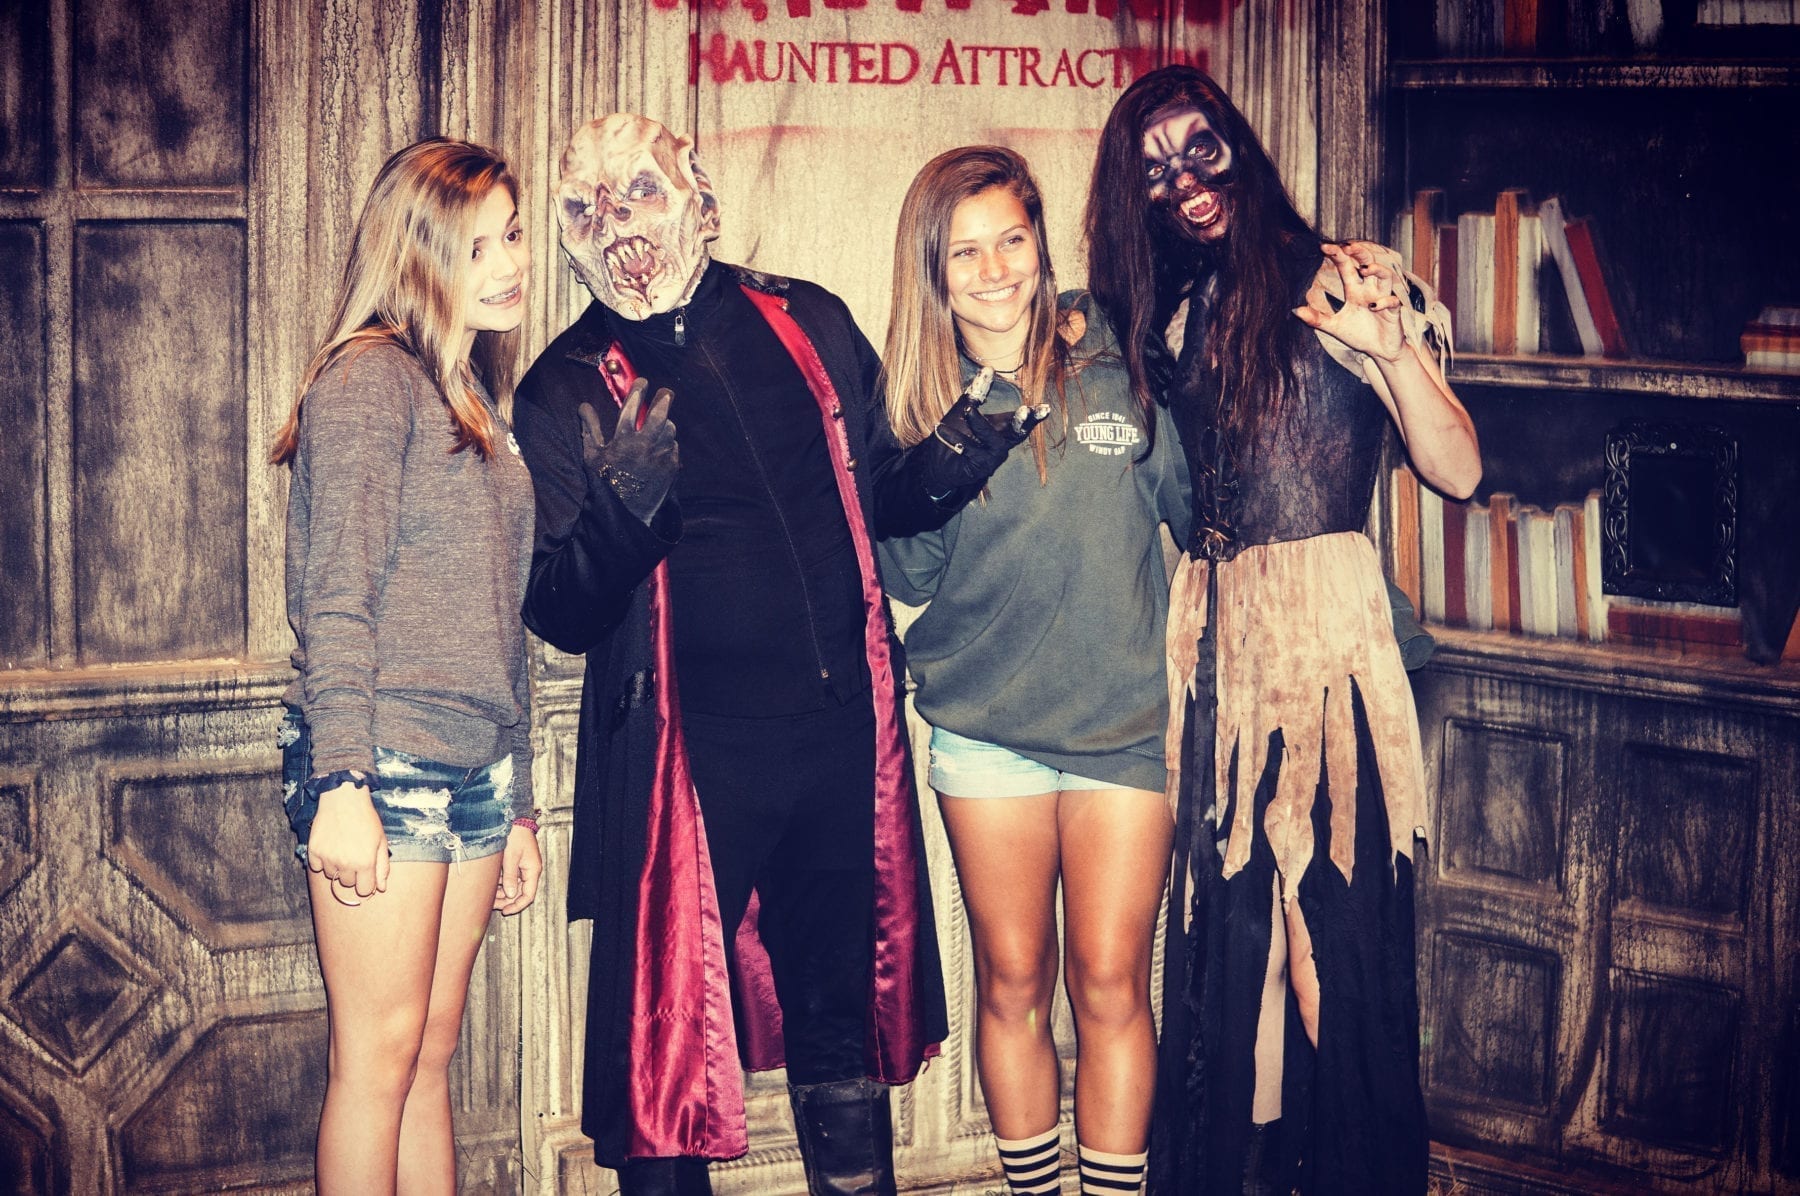 Madworld Haunted Attraction, Best Haunted House in South Carolina